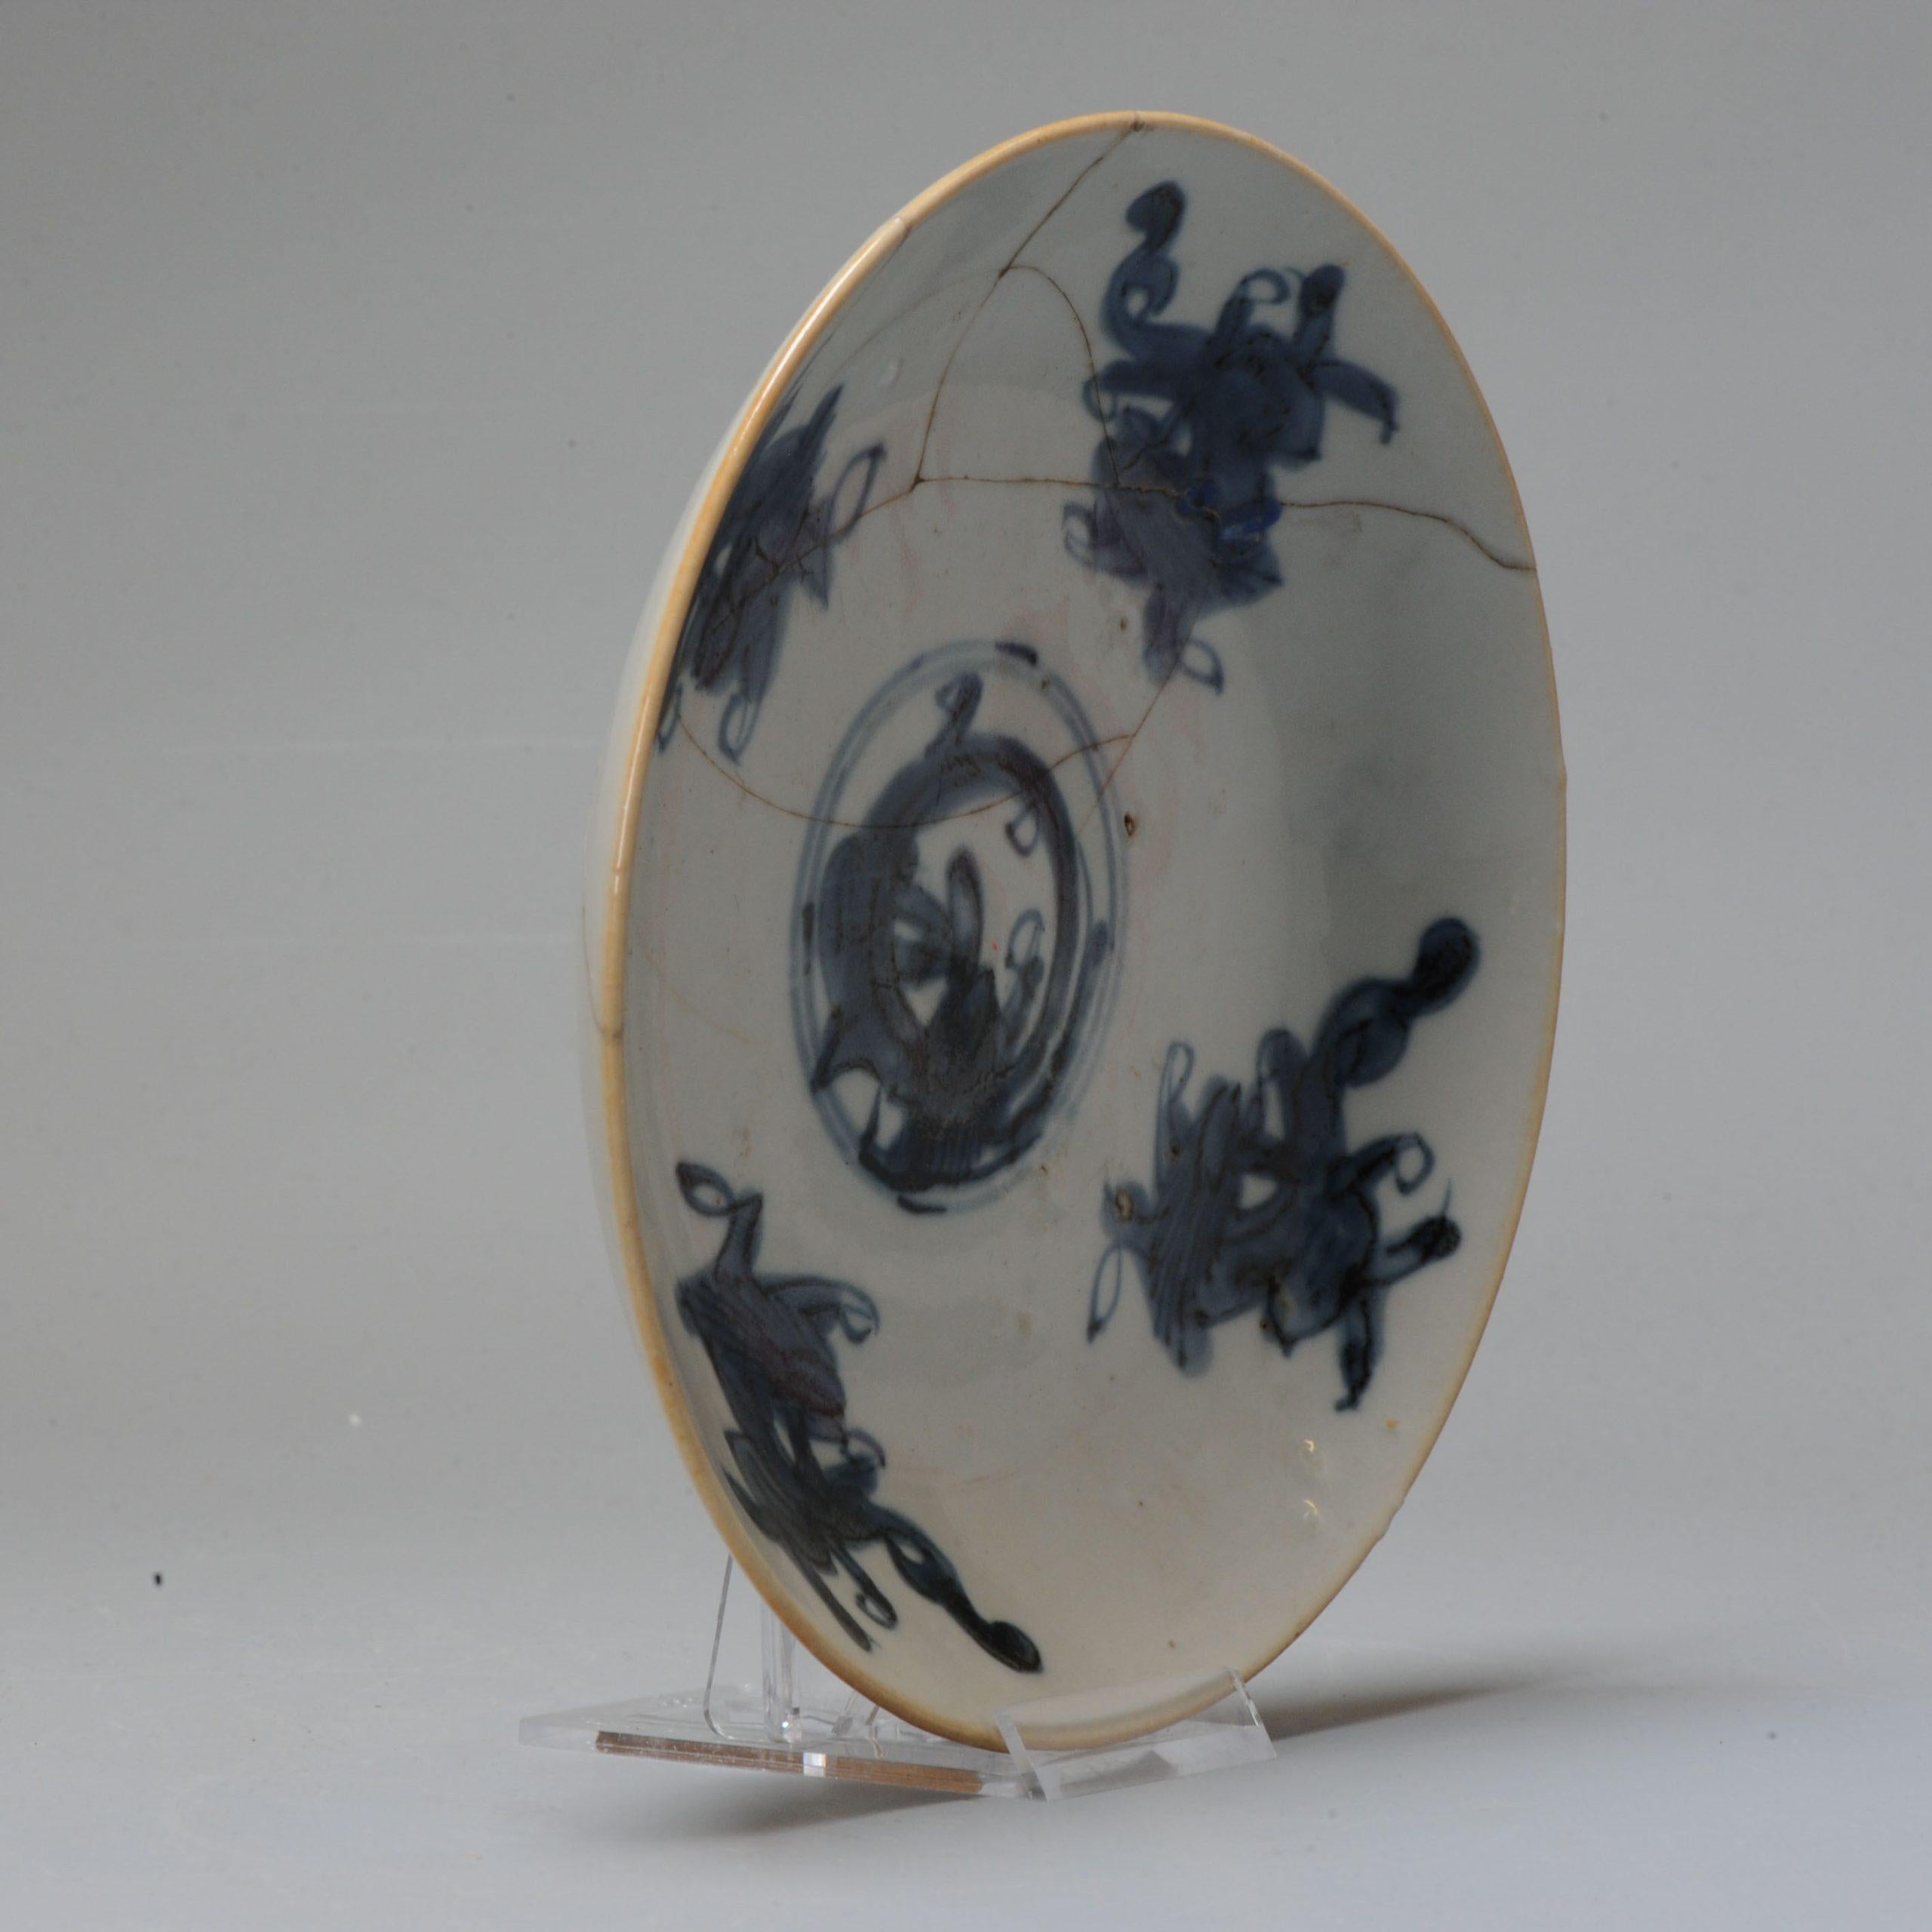 A very nicely decorated Ming period Swatow or Zhangzhou porcelain dish with Chilong

These small dishes would have been used for the Japanese tea ceremony meal, the Kaiseki.

Kaiseki or kaiseki-ryōri is a traditional multi-course Japanese dinner.